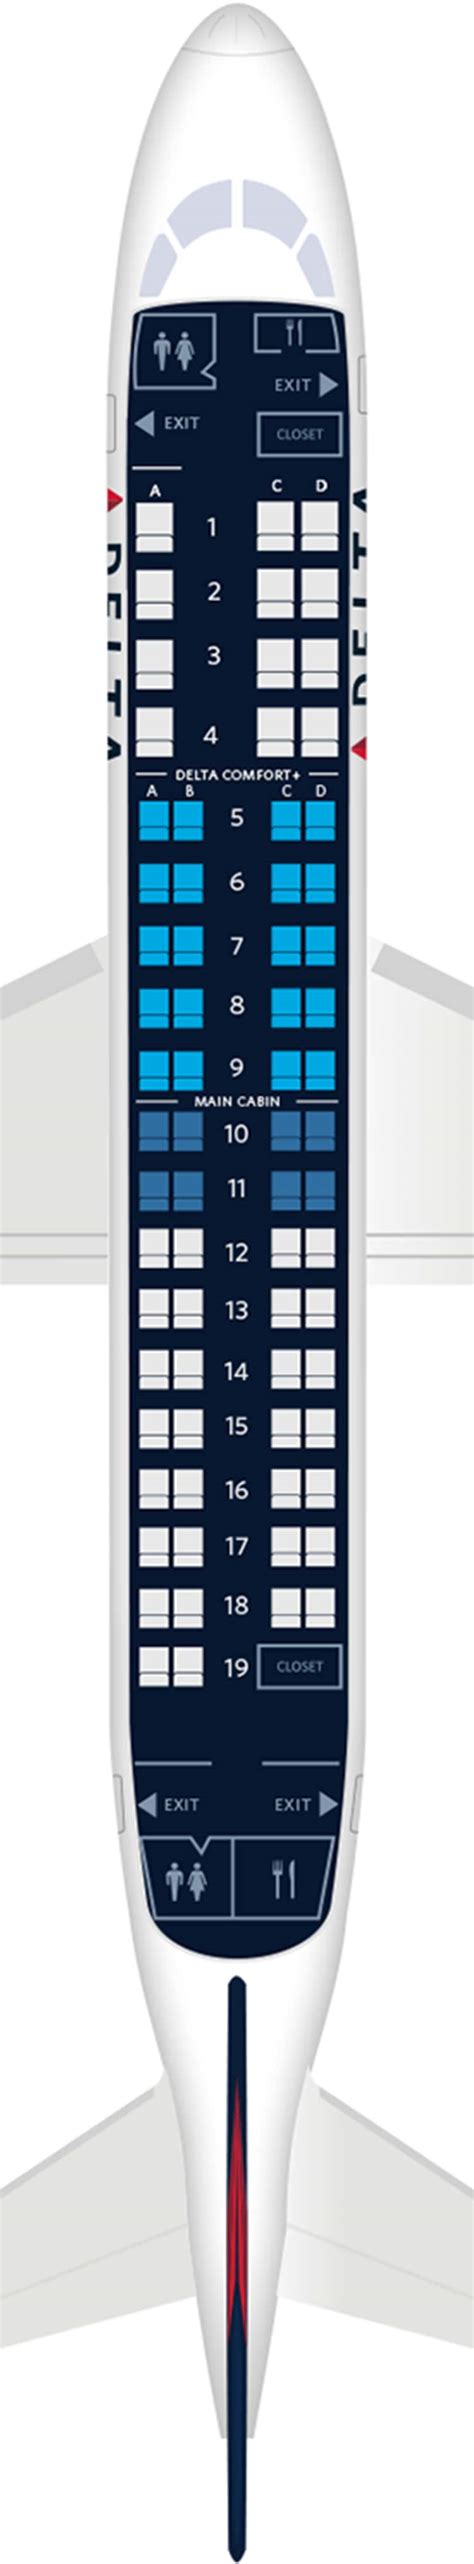 Embraer 175 seating map. Check out our British Airways seat maps - the most detailed, up to date, and popular British Airways seating charts and cabin layouts available. seat nk beta. seat nk beta. airlines. Browse All. A. ... · Embraer 175 · Embraer 190 (Domestic) · Embraer 190 (European) · Fairchild Dornier 328-100 · Fairchild Dornier 328JET · Saab 2000 ... 